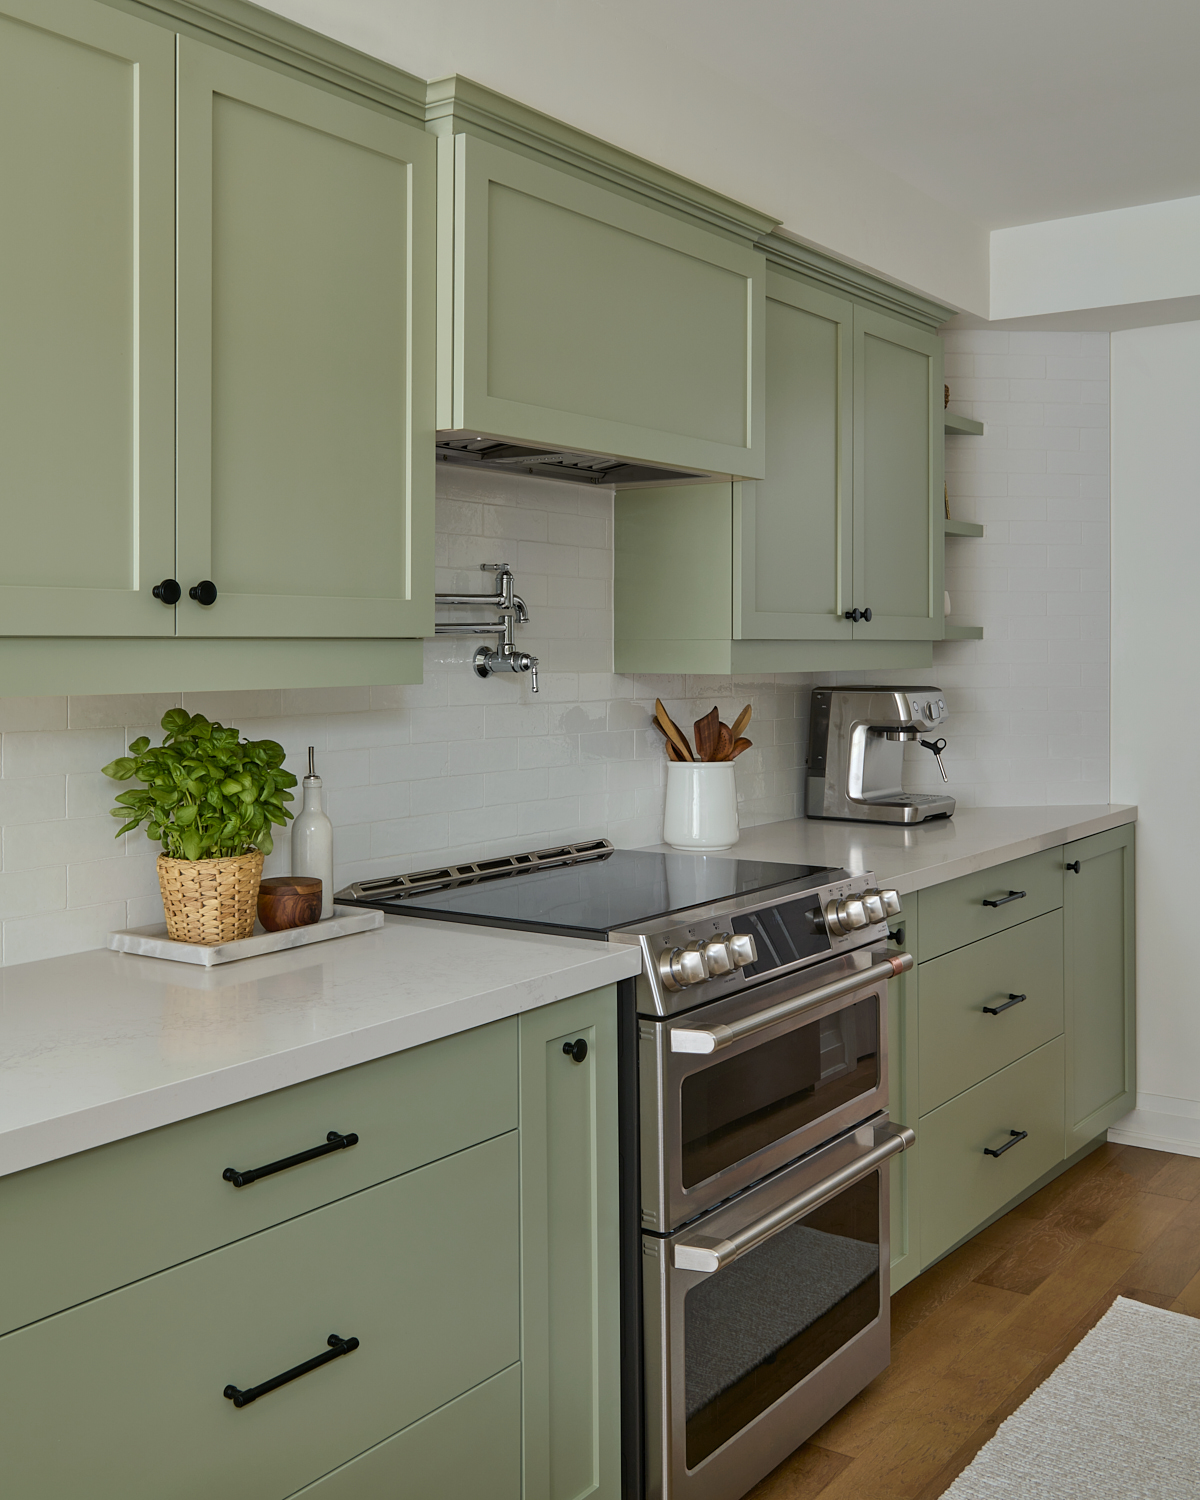 kitchen with light green cabinets, oak wood floors, white countertops and tiled backsplash